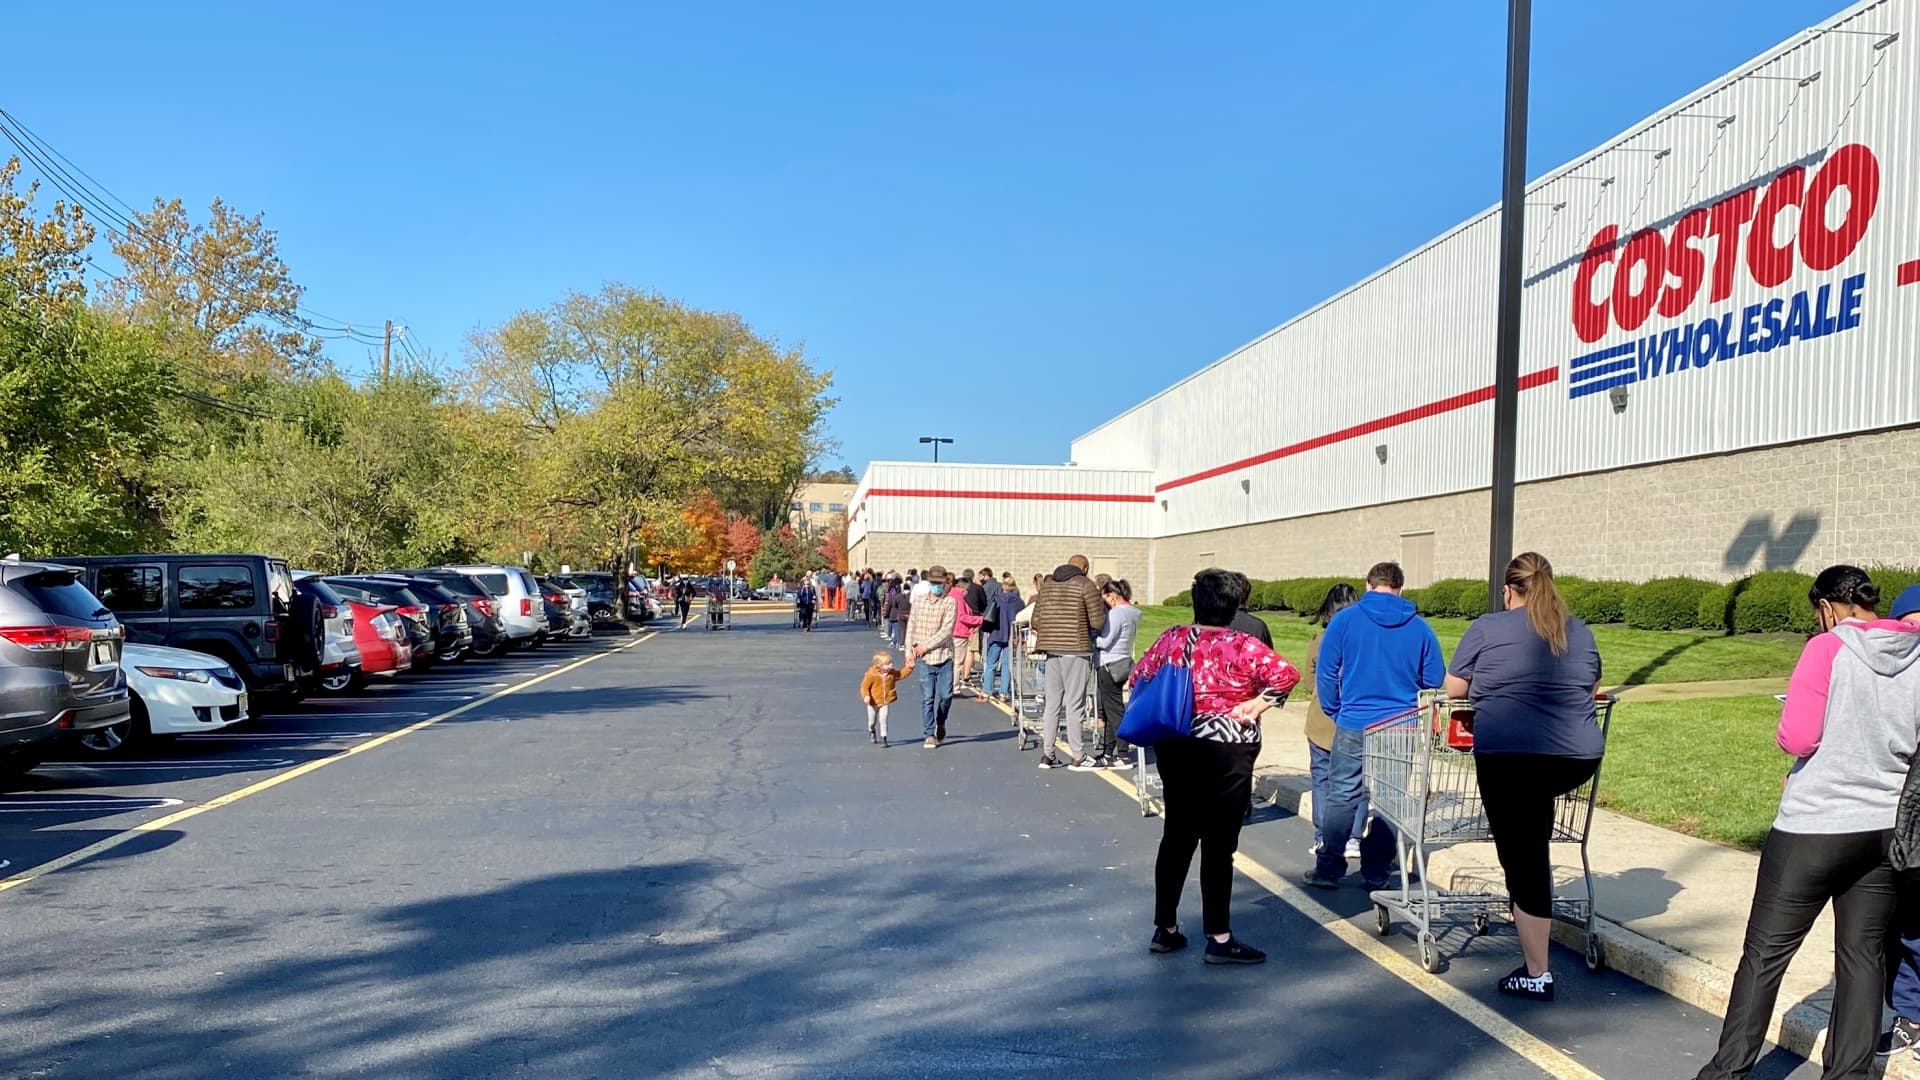 Shoppers lined up to enter a Costco in Clifton, New Jersey in early November ahead of the Thanksgiving shopping rush.